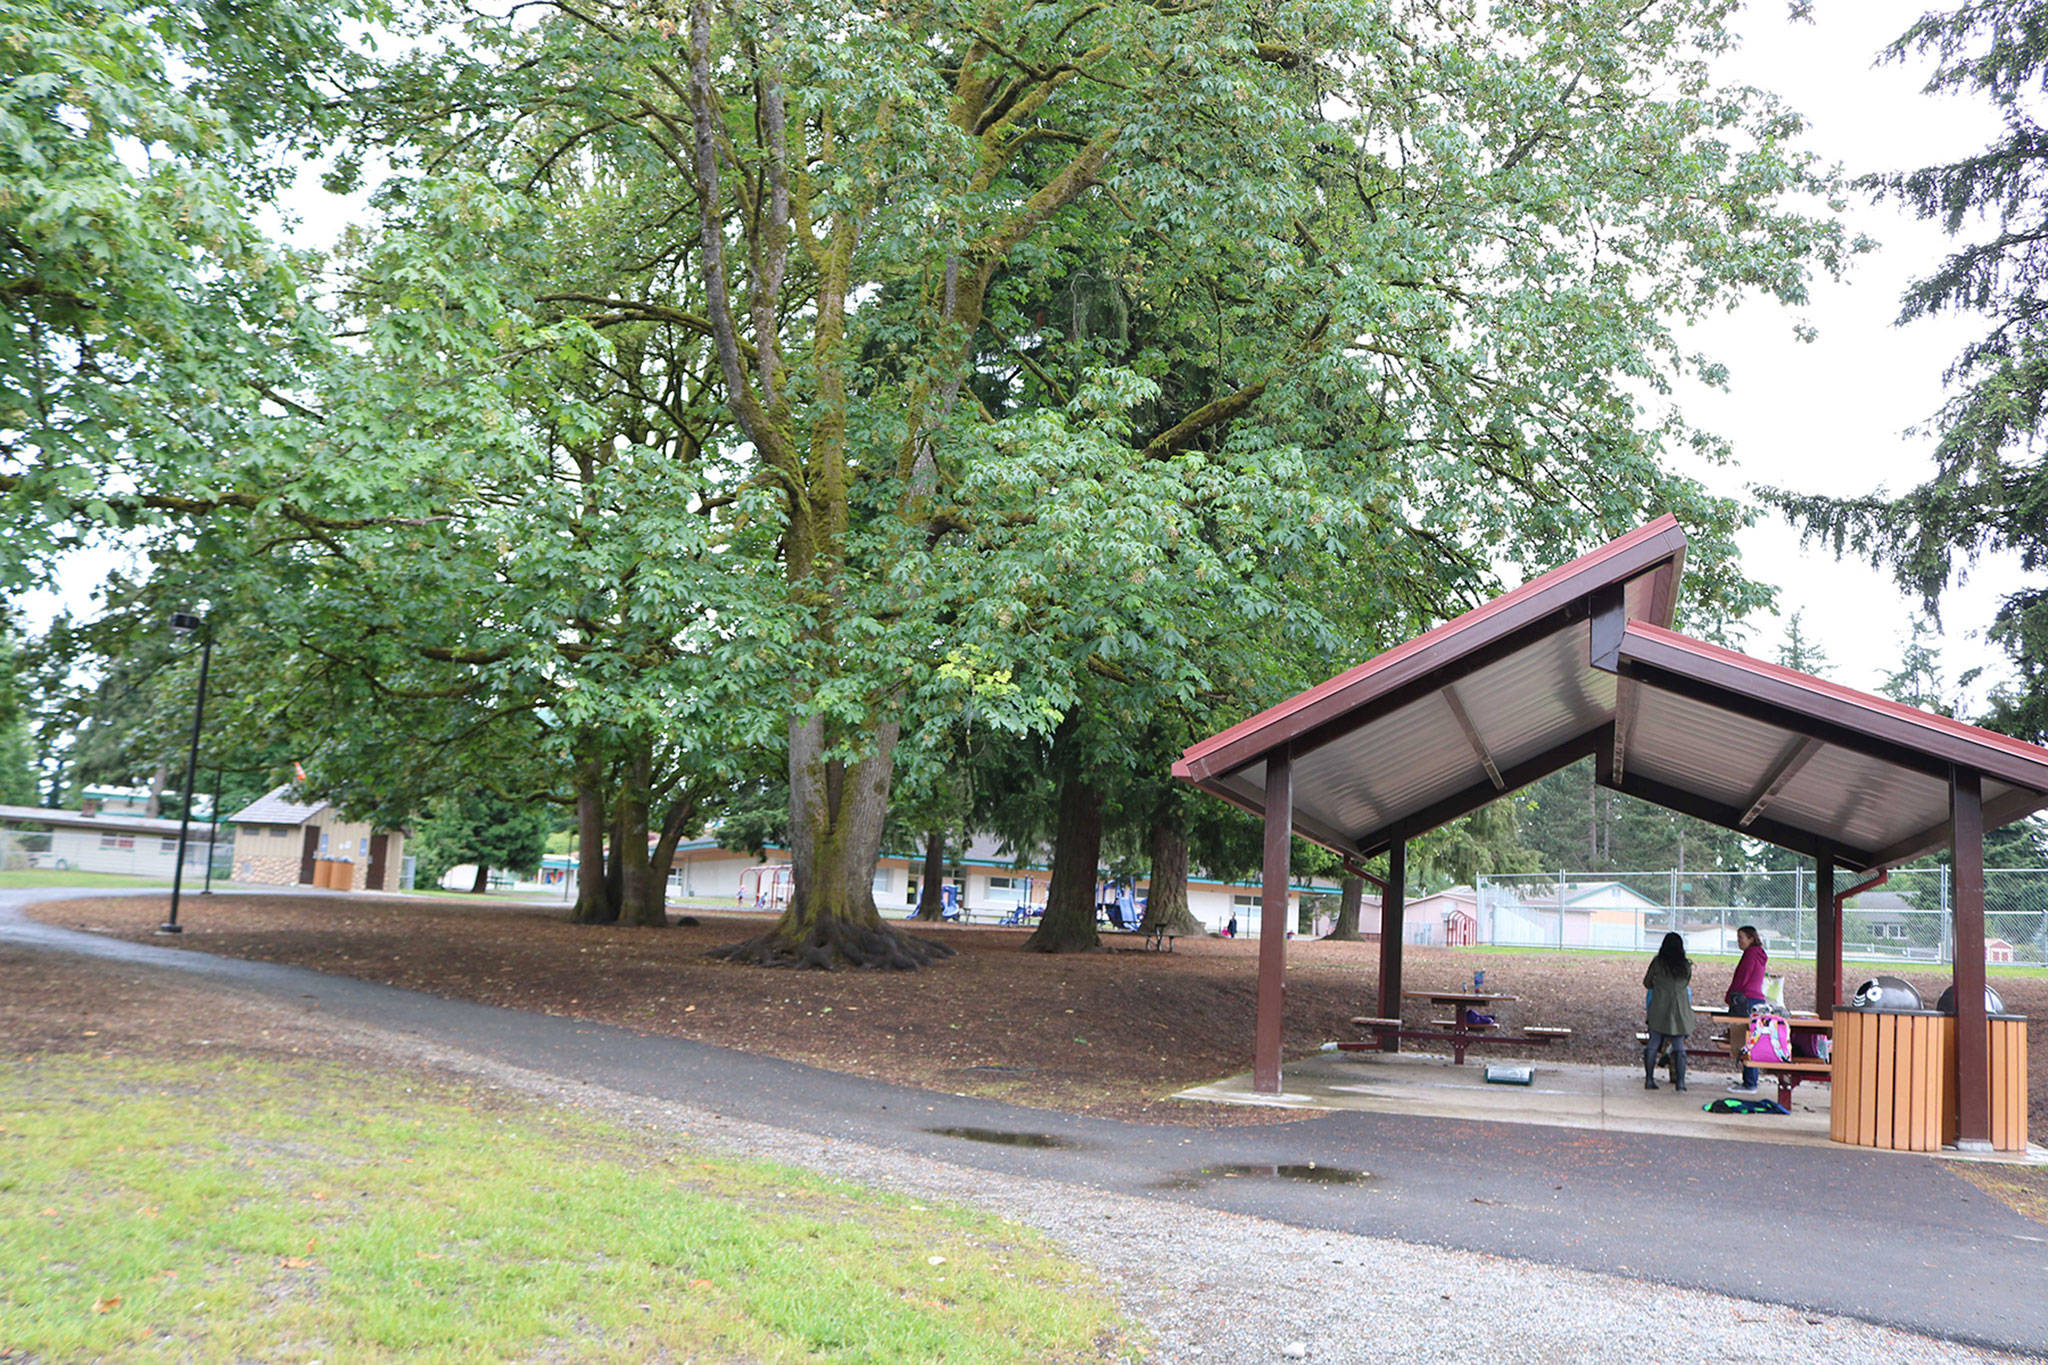 The park also has a brand new picnic pavilion. Photo courtesy of the city of Kenmore